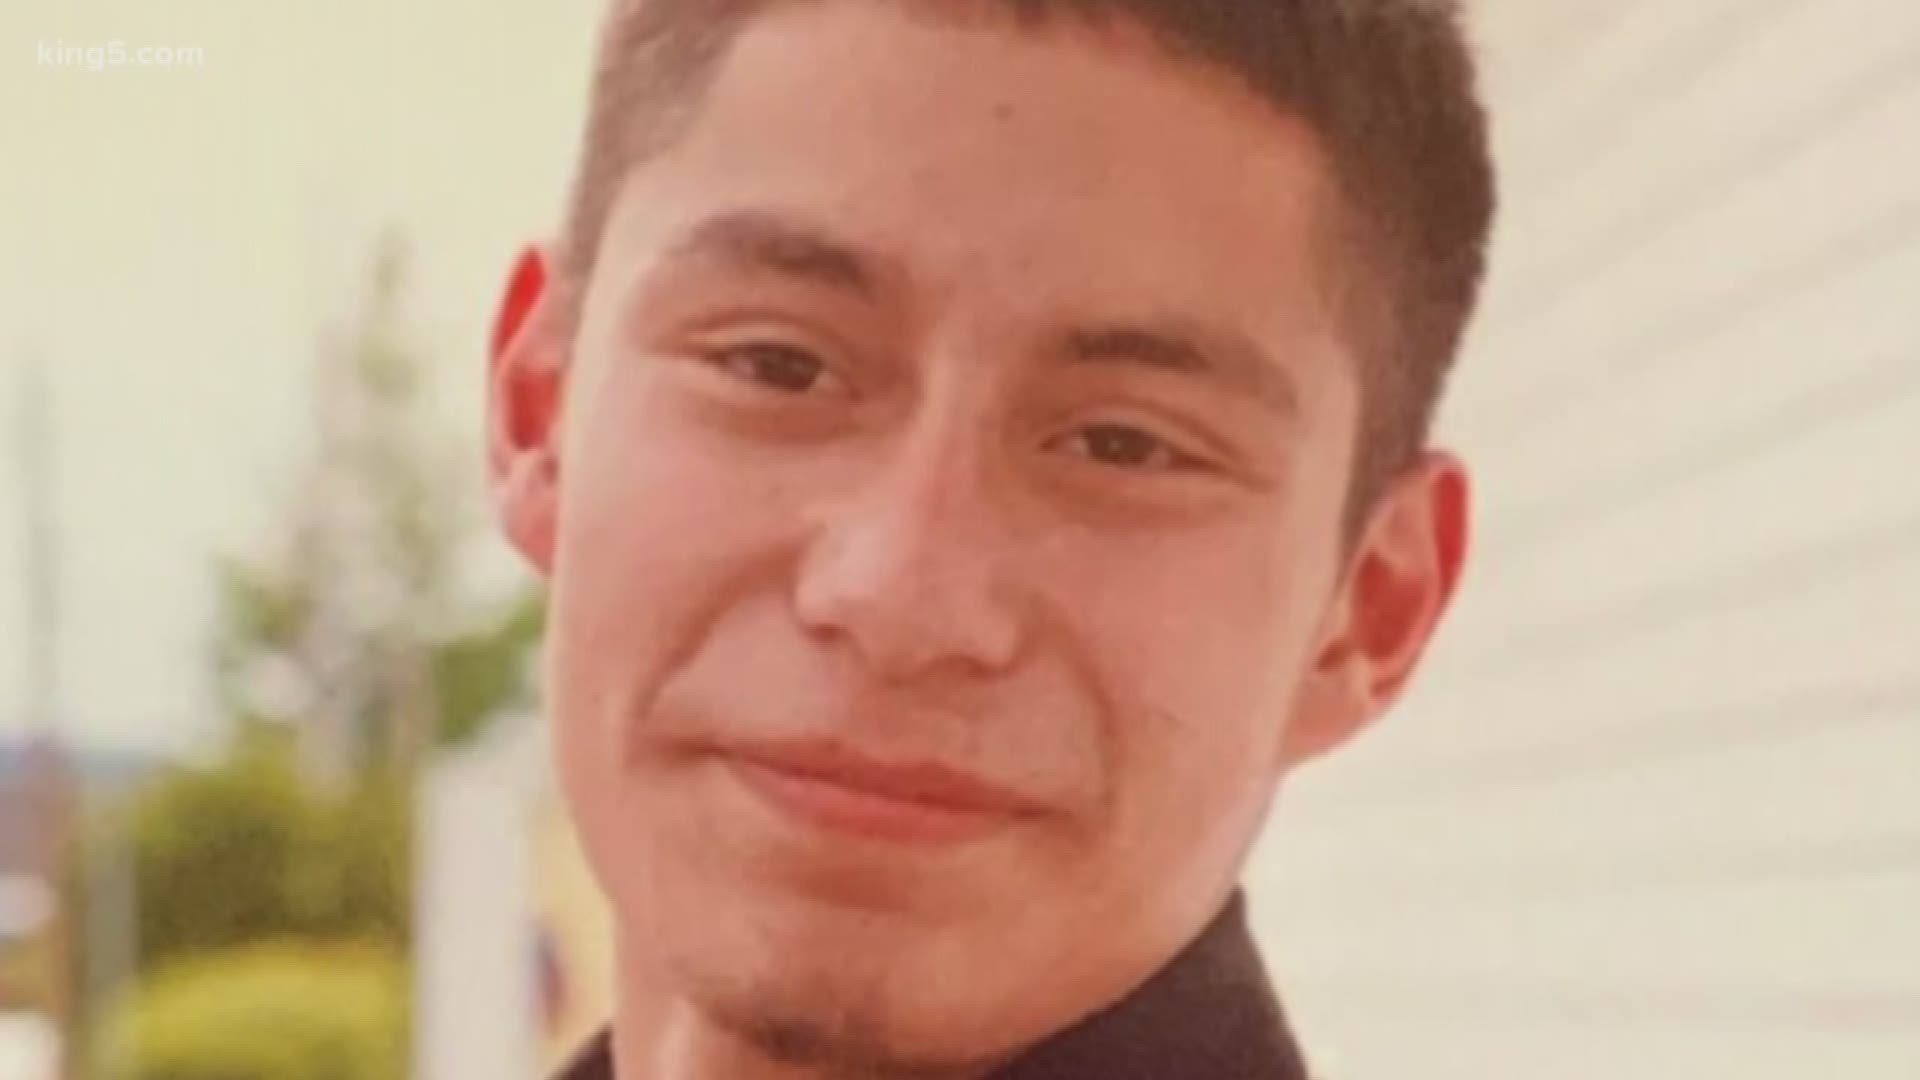 Juan Carlos Con Guzman, 16, was allegedly killed during a fight with two MS-13 gang members, court documents said. The two suspects are now in the King County Jail.